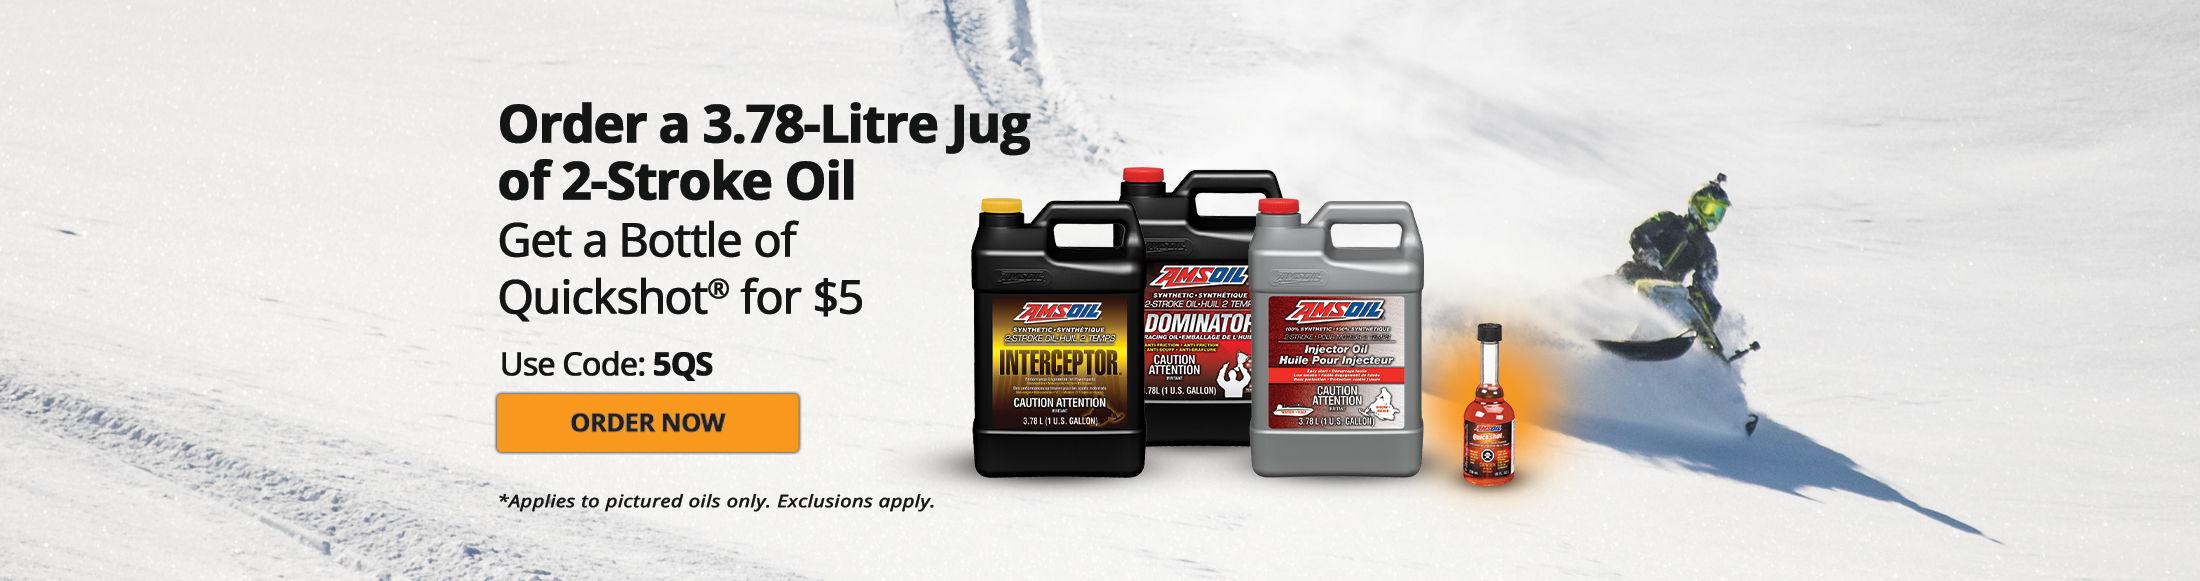 Order a 3.78-Litre Jug of 2-Stroke Oil and Get a Bottle of Quickshot® for $5. Use Code: 5QS and order now. *Applies only to 2 Stroke Interceptor Oil, 2 Stroke Dominator Oil, or 2 Stroke Injector Oil. Exclusions apply.